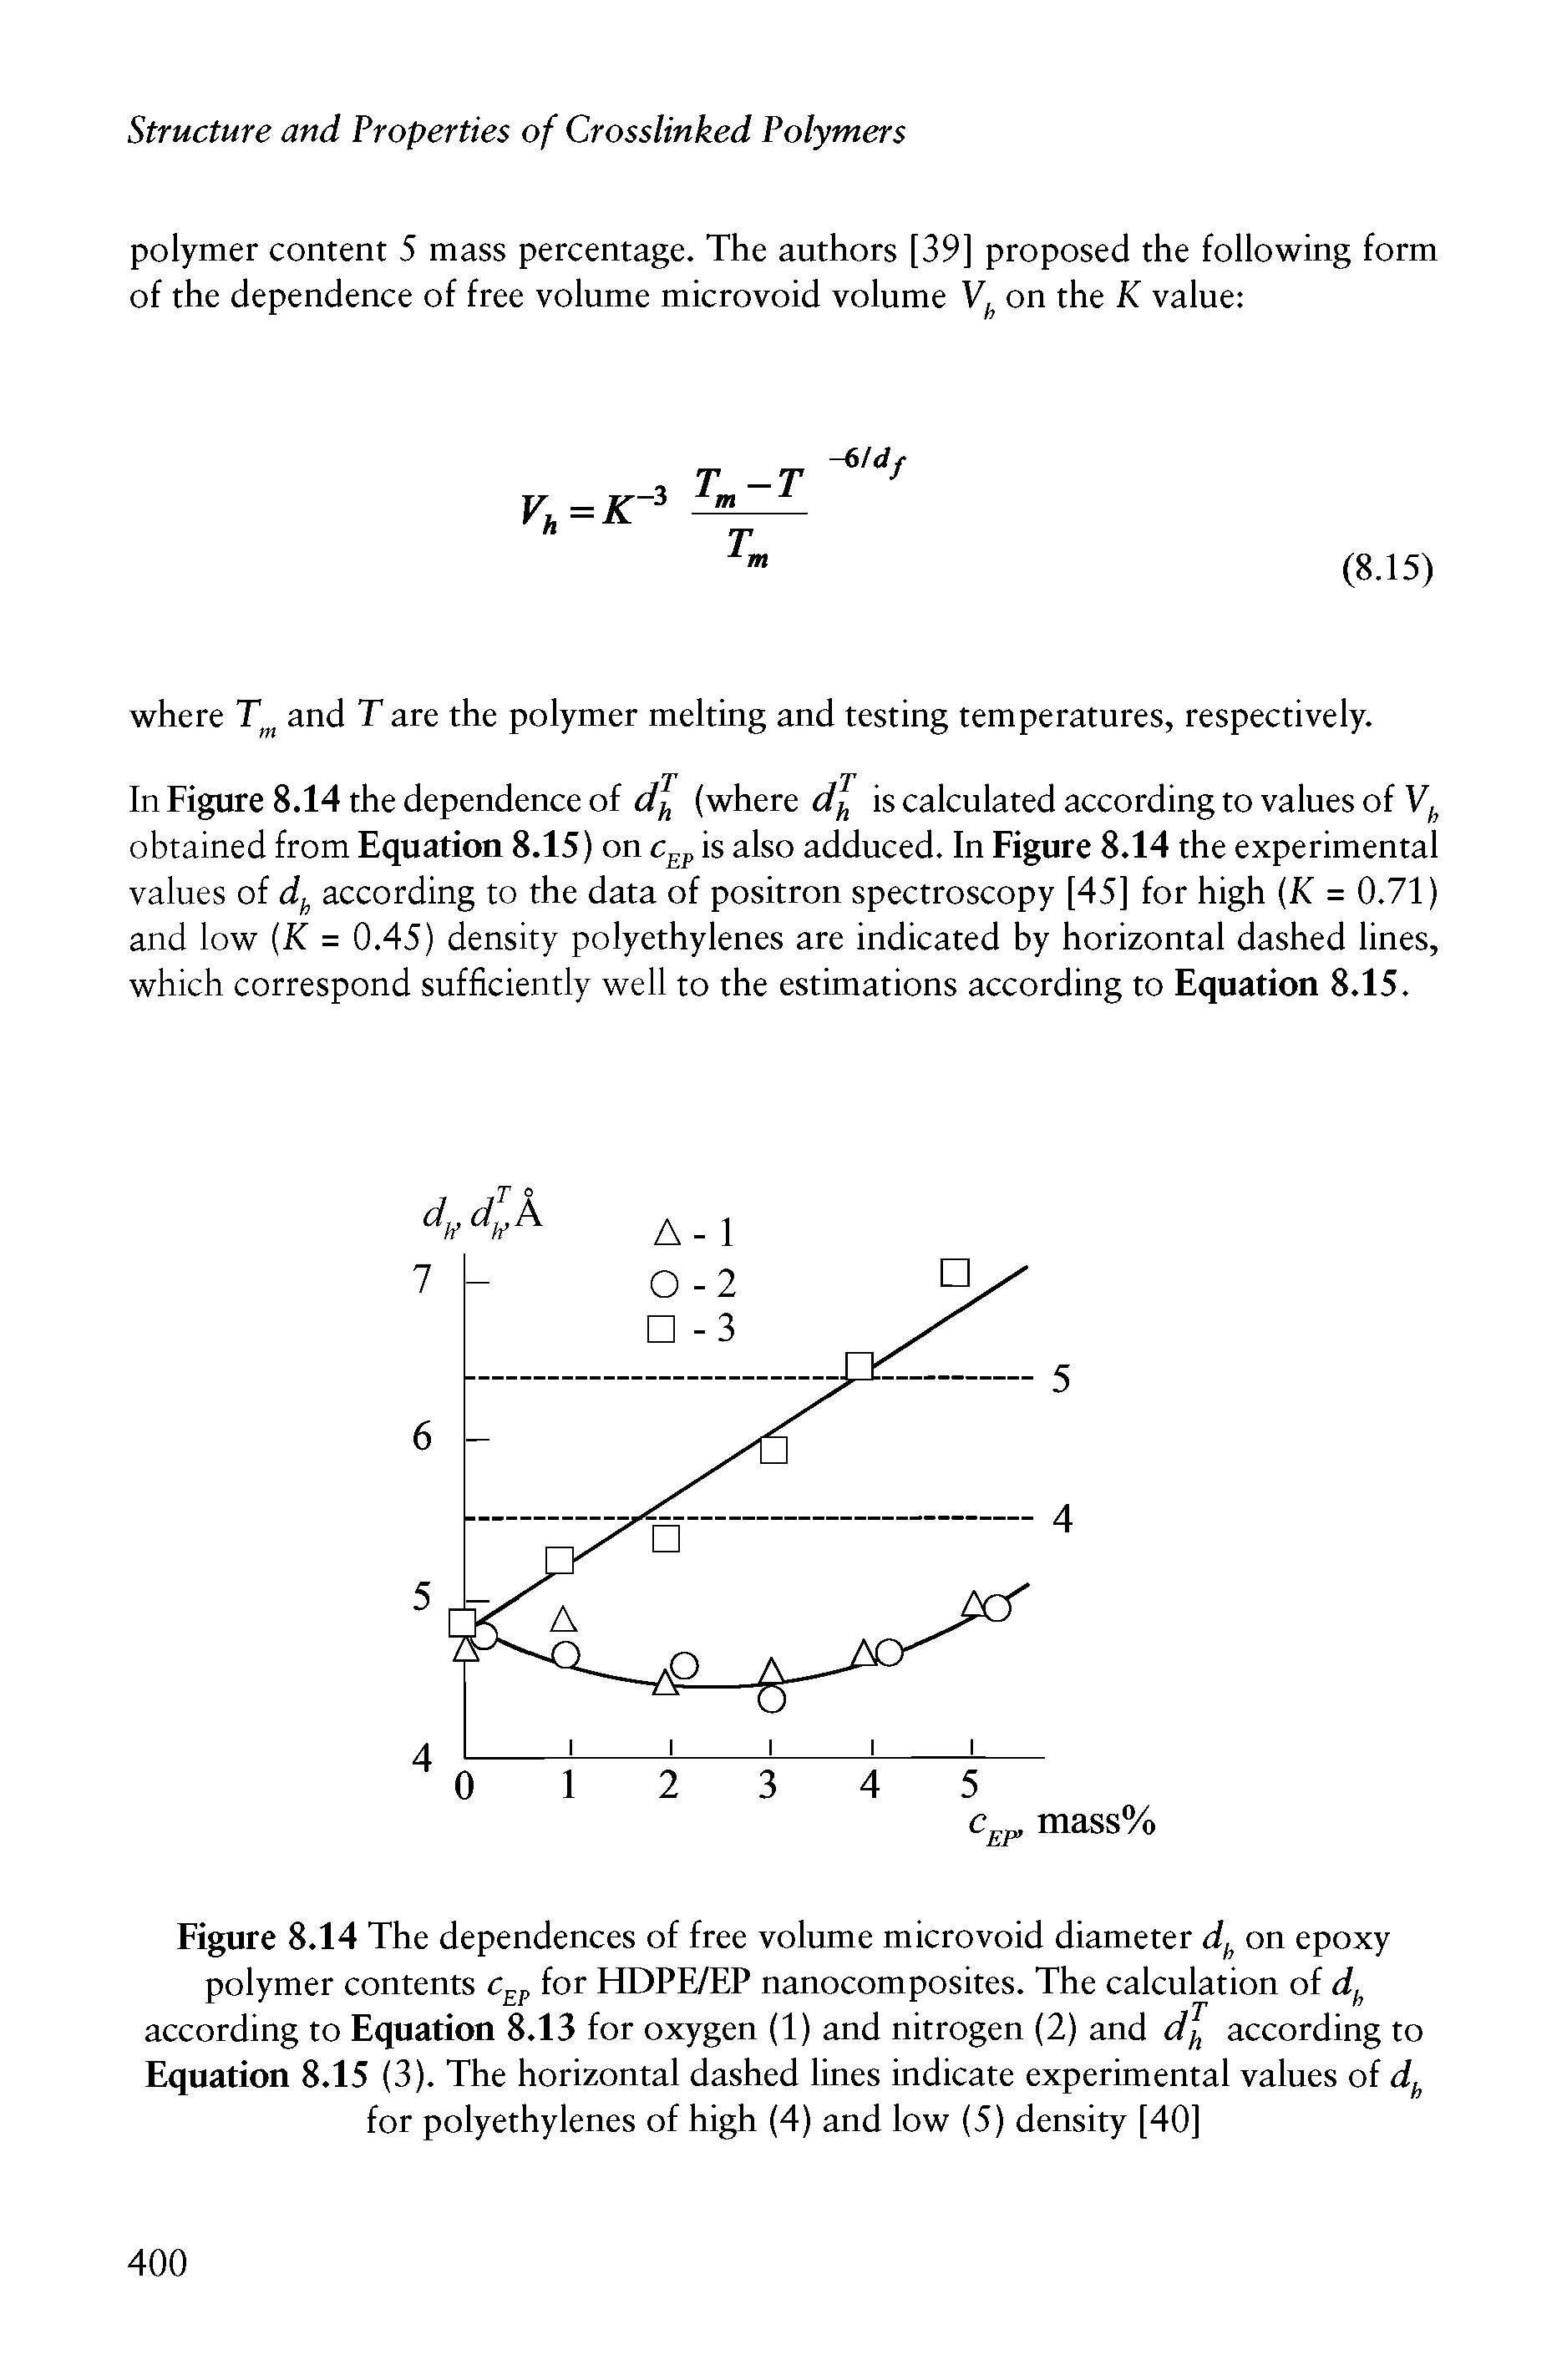 Figure 8.14 The dependences of free volume microvoid diameter on epoxy polymer contents c p for HDPE/EP nanocomposites. The calculation of d according to Equation 8.13 for oxygen (1) and nitrogen (2) and d according to Equation 8.15 (3). The horizontal dashed lines indicate experimental values of for polyethylenes of high (4) and low (5) density [40]...